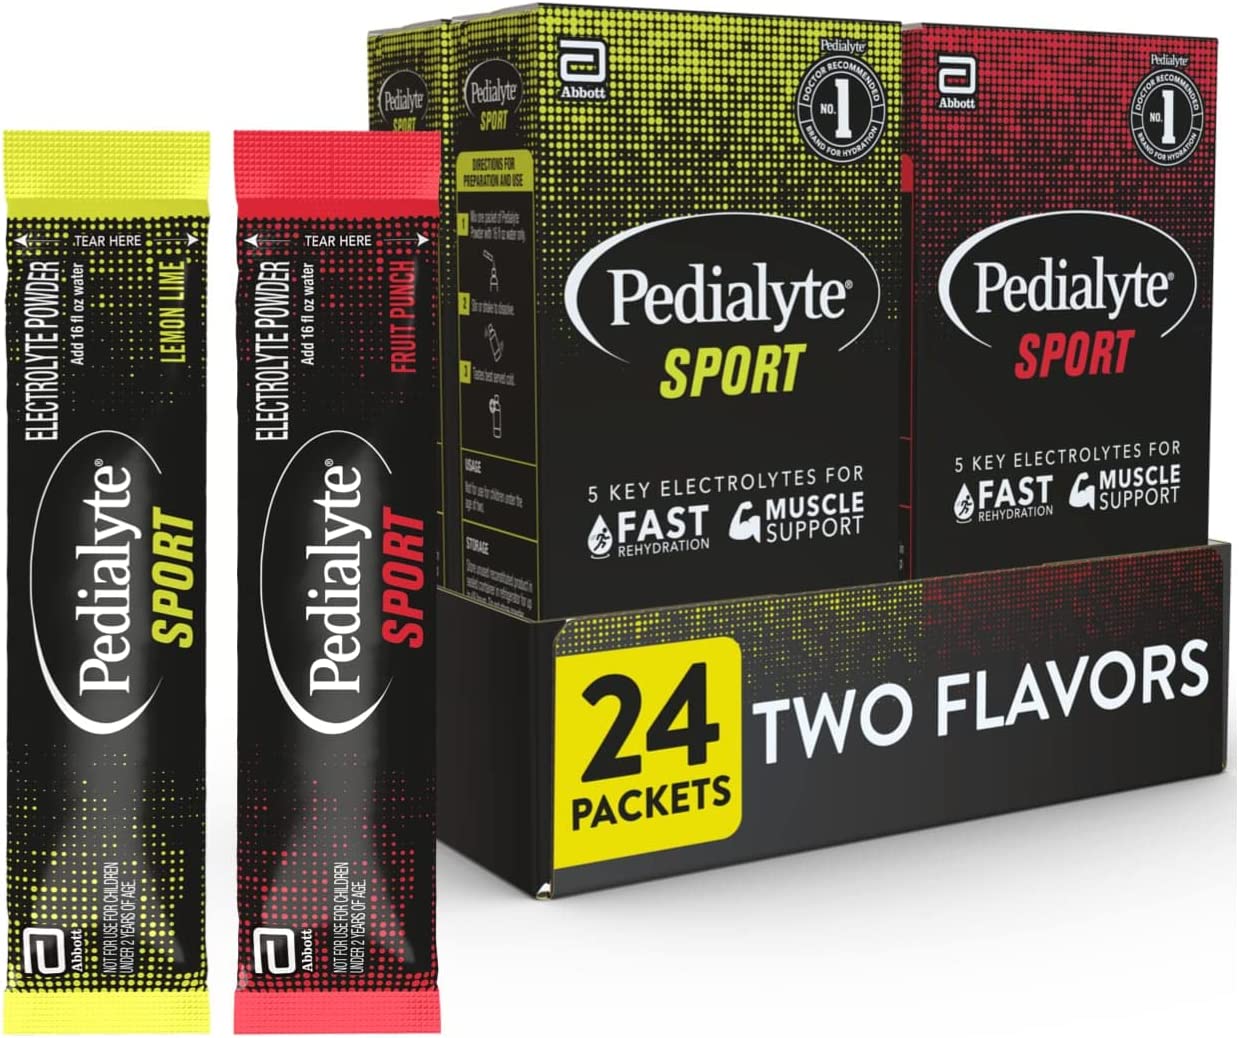 Pedialyte Sport Electrolyte Powder, Fast Hydration with 5 Key Electrolytes for Muscle Support Before, During, & After Exercise, 12 Lemon Lime & 12 Fruit Punch, 0.49-oz Packets (24 Count)